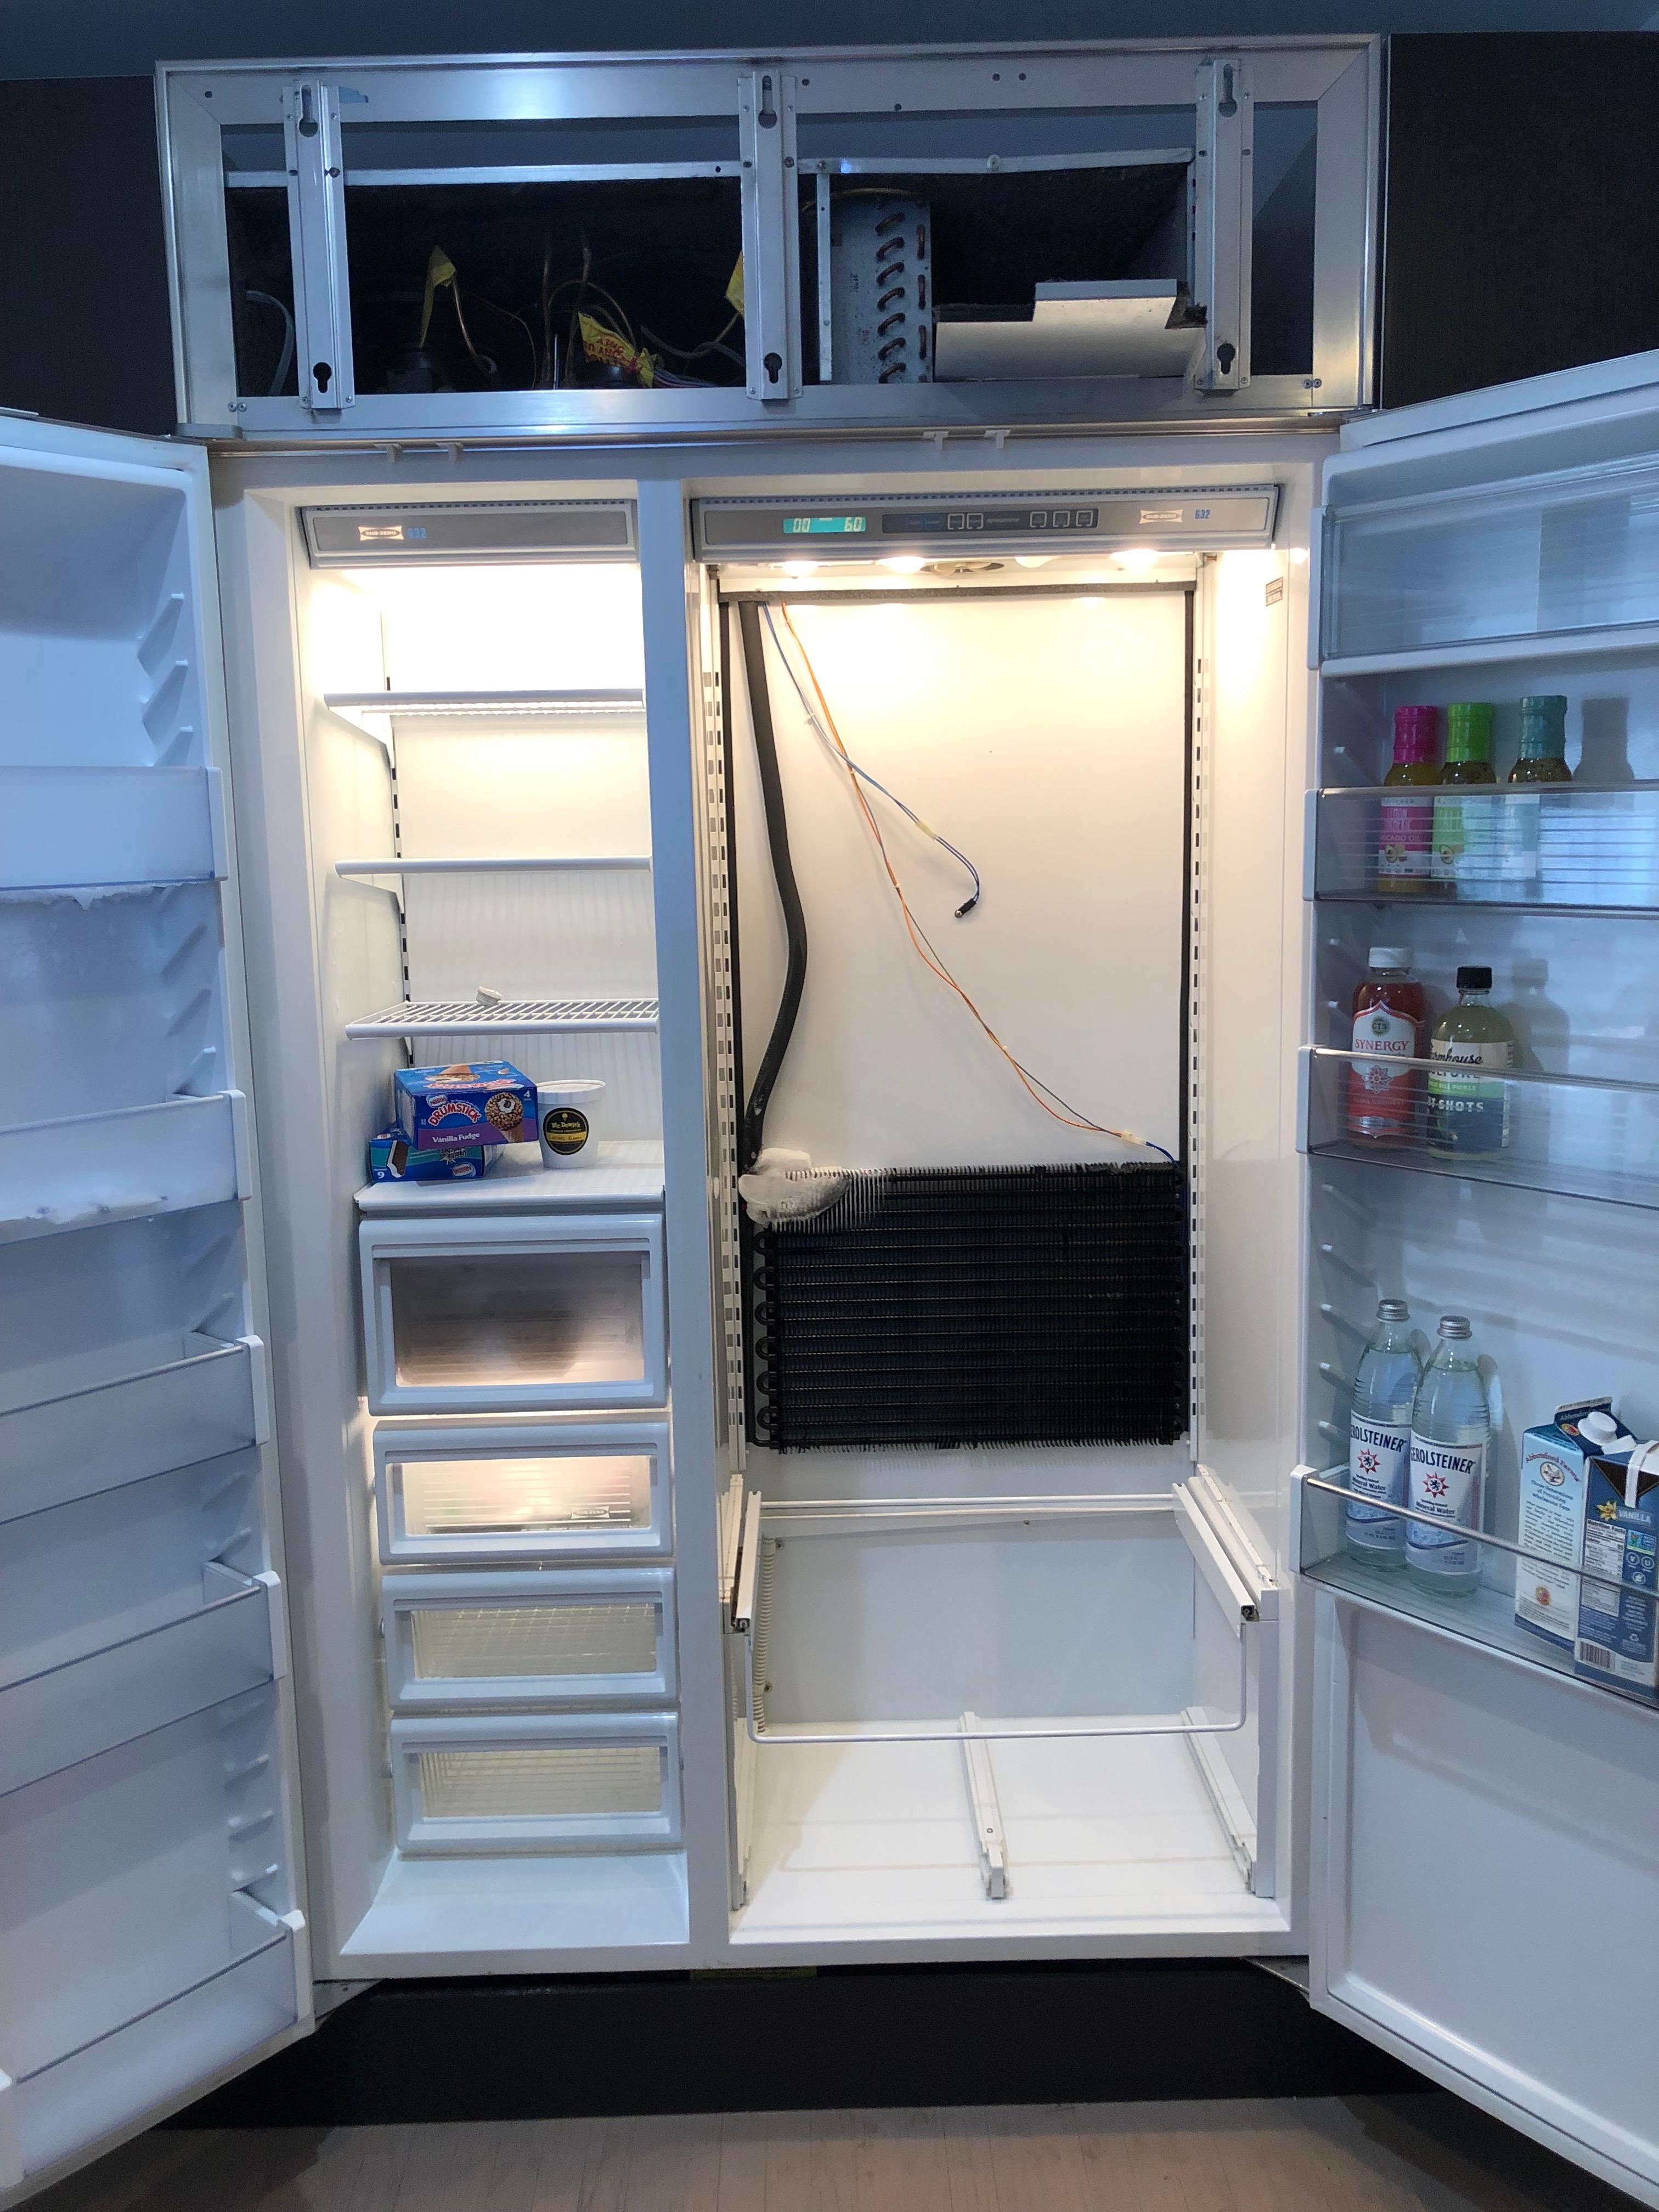 Picture of FixEm Appliance Repair fixed this Sub-Zero refrigerator that wasn't cooling properly. - FixEm Appliance Repair